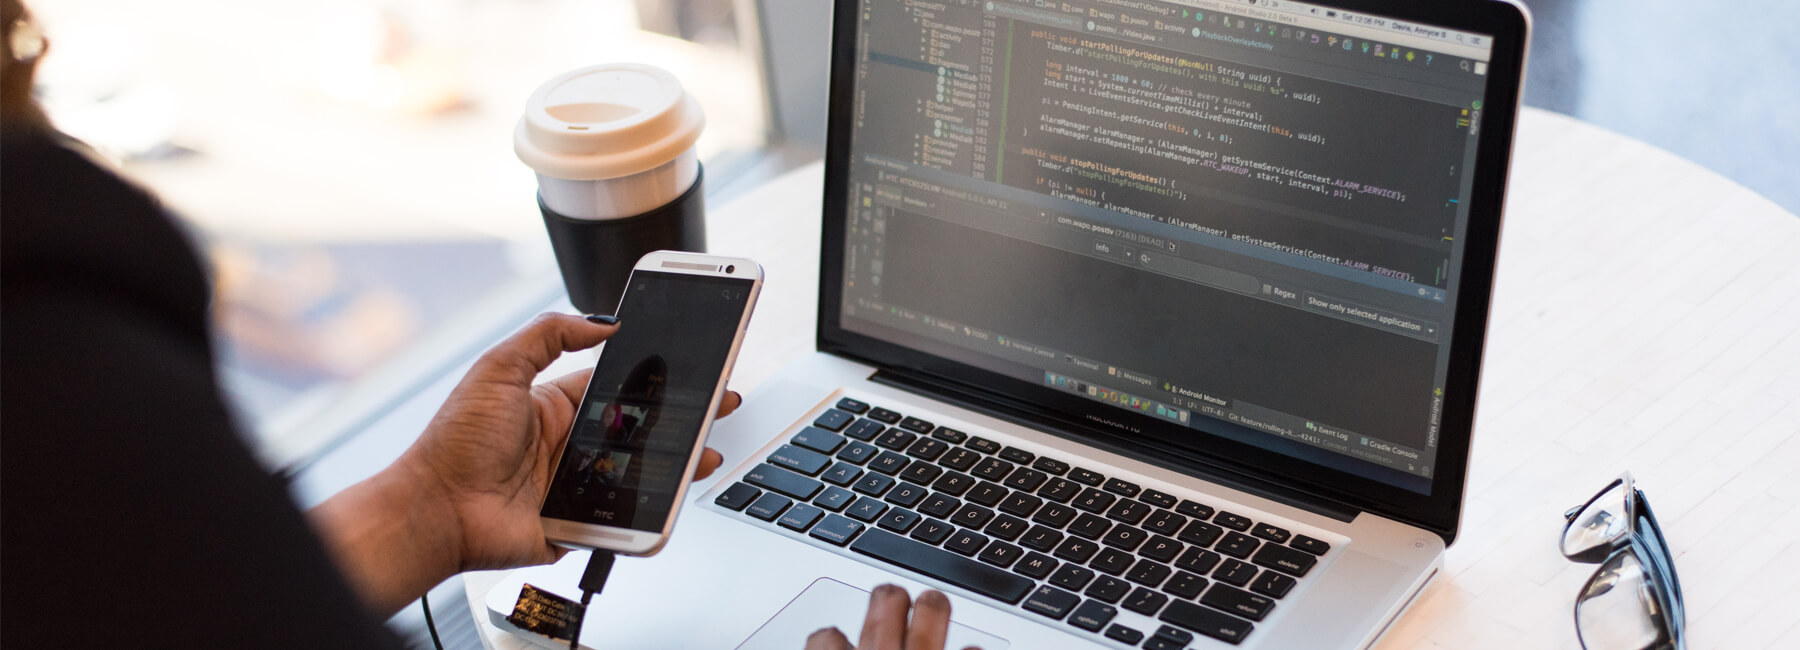 Top 20 Mobile App Development Tools: An Overview